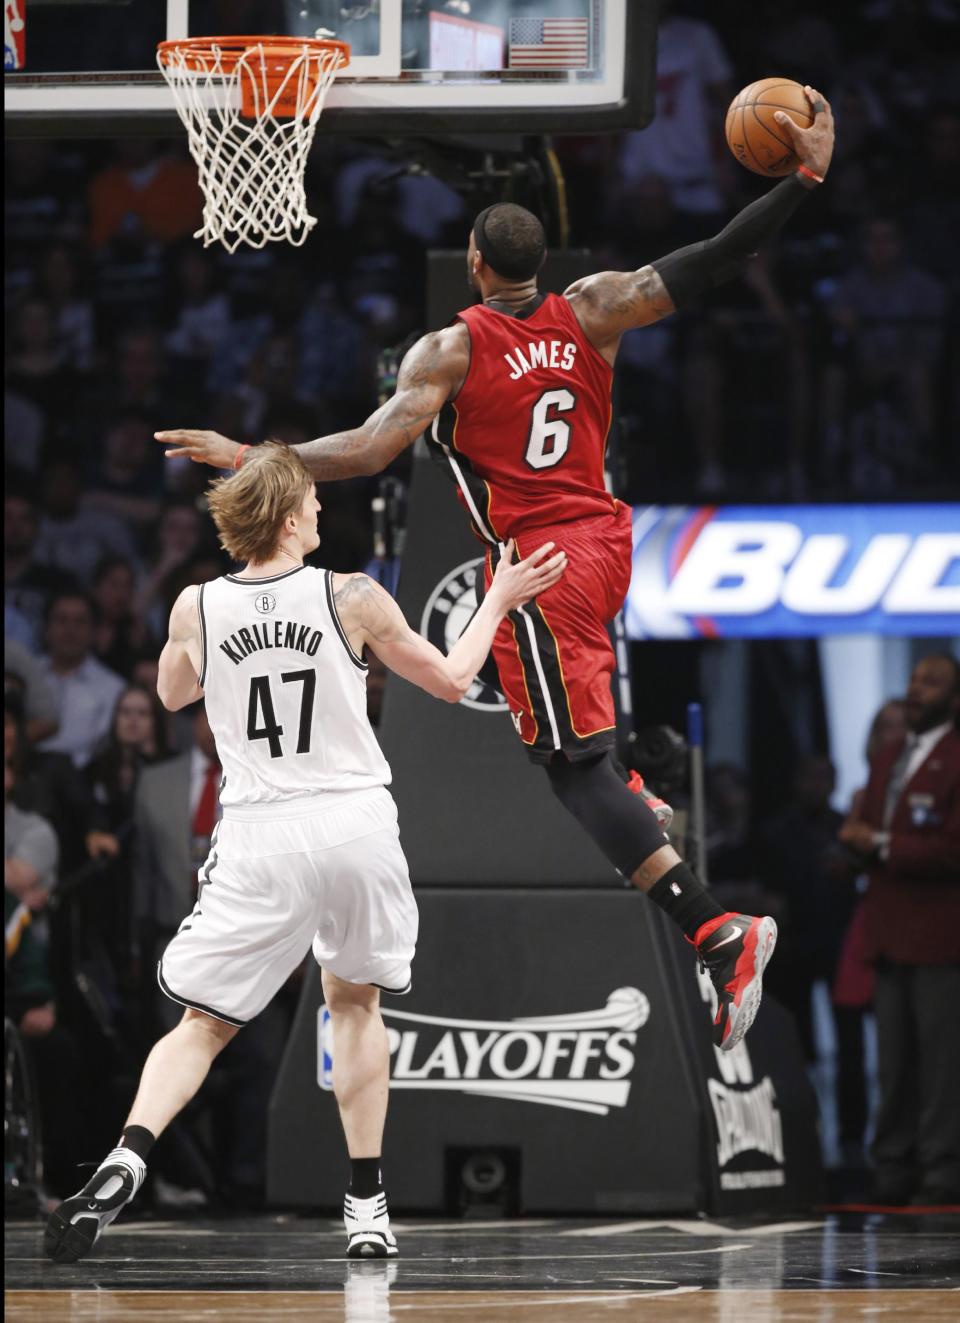 Miami Heat forward LeBron James (6) scores over Brooklyn Nets forward Andrei Kirilenko (47) in the first half of Game 4 of a second-round NBA playoff basketball game at the Barclays Center, Monday, May 12, 2014, in New York. (AP Photo)